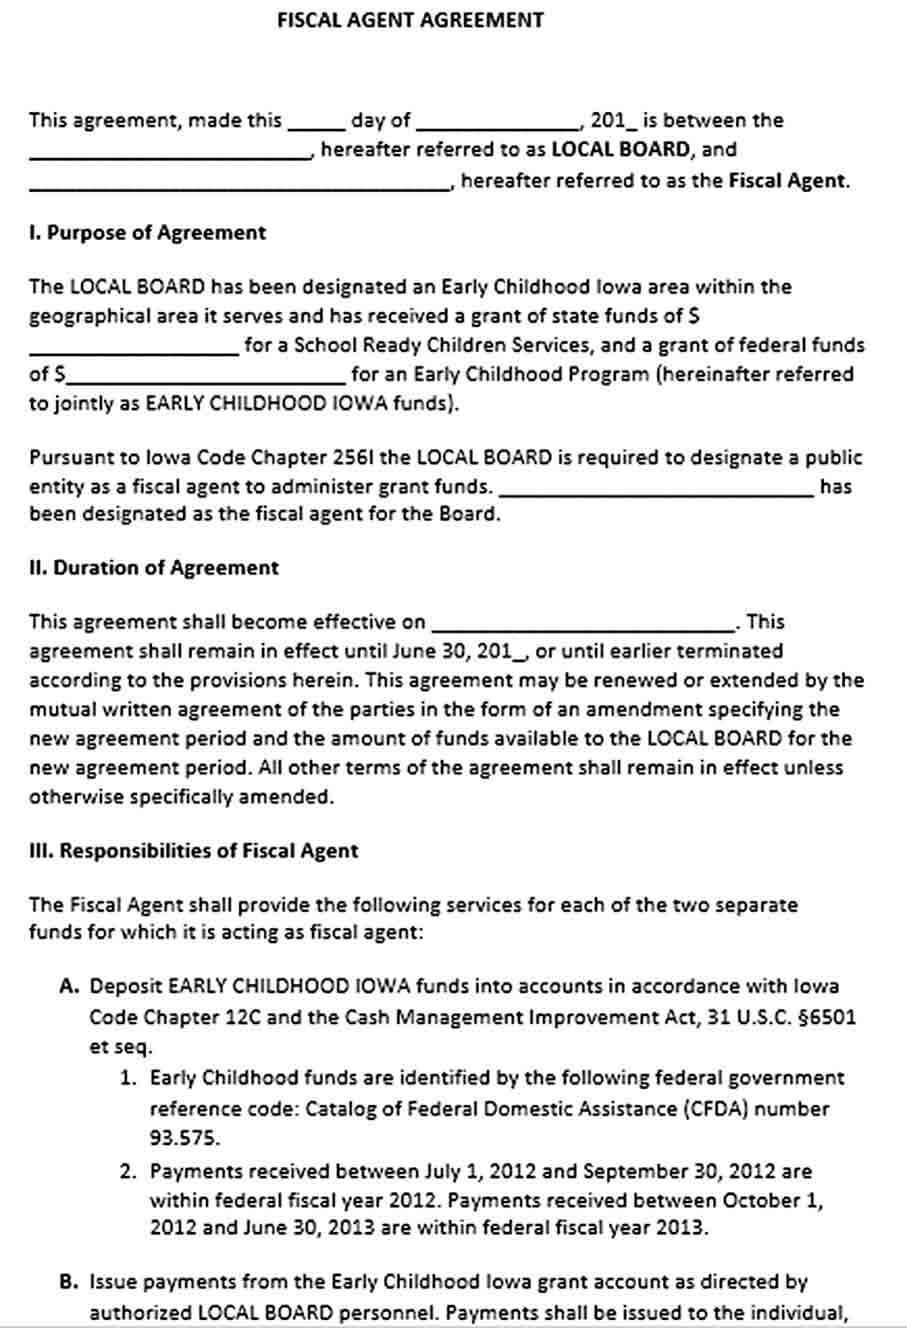 Sample Fiscal Agent Agreement Template